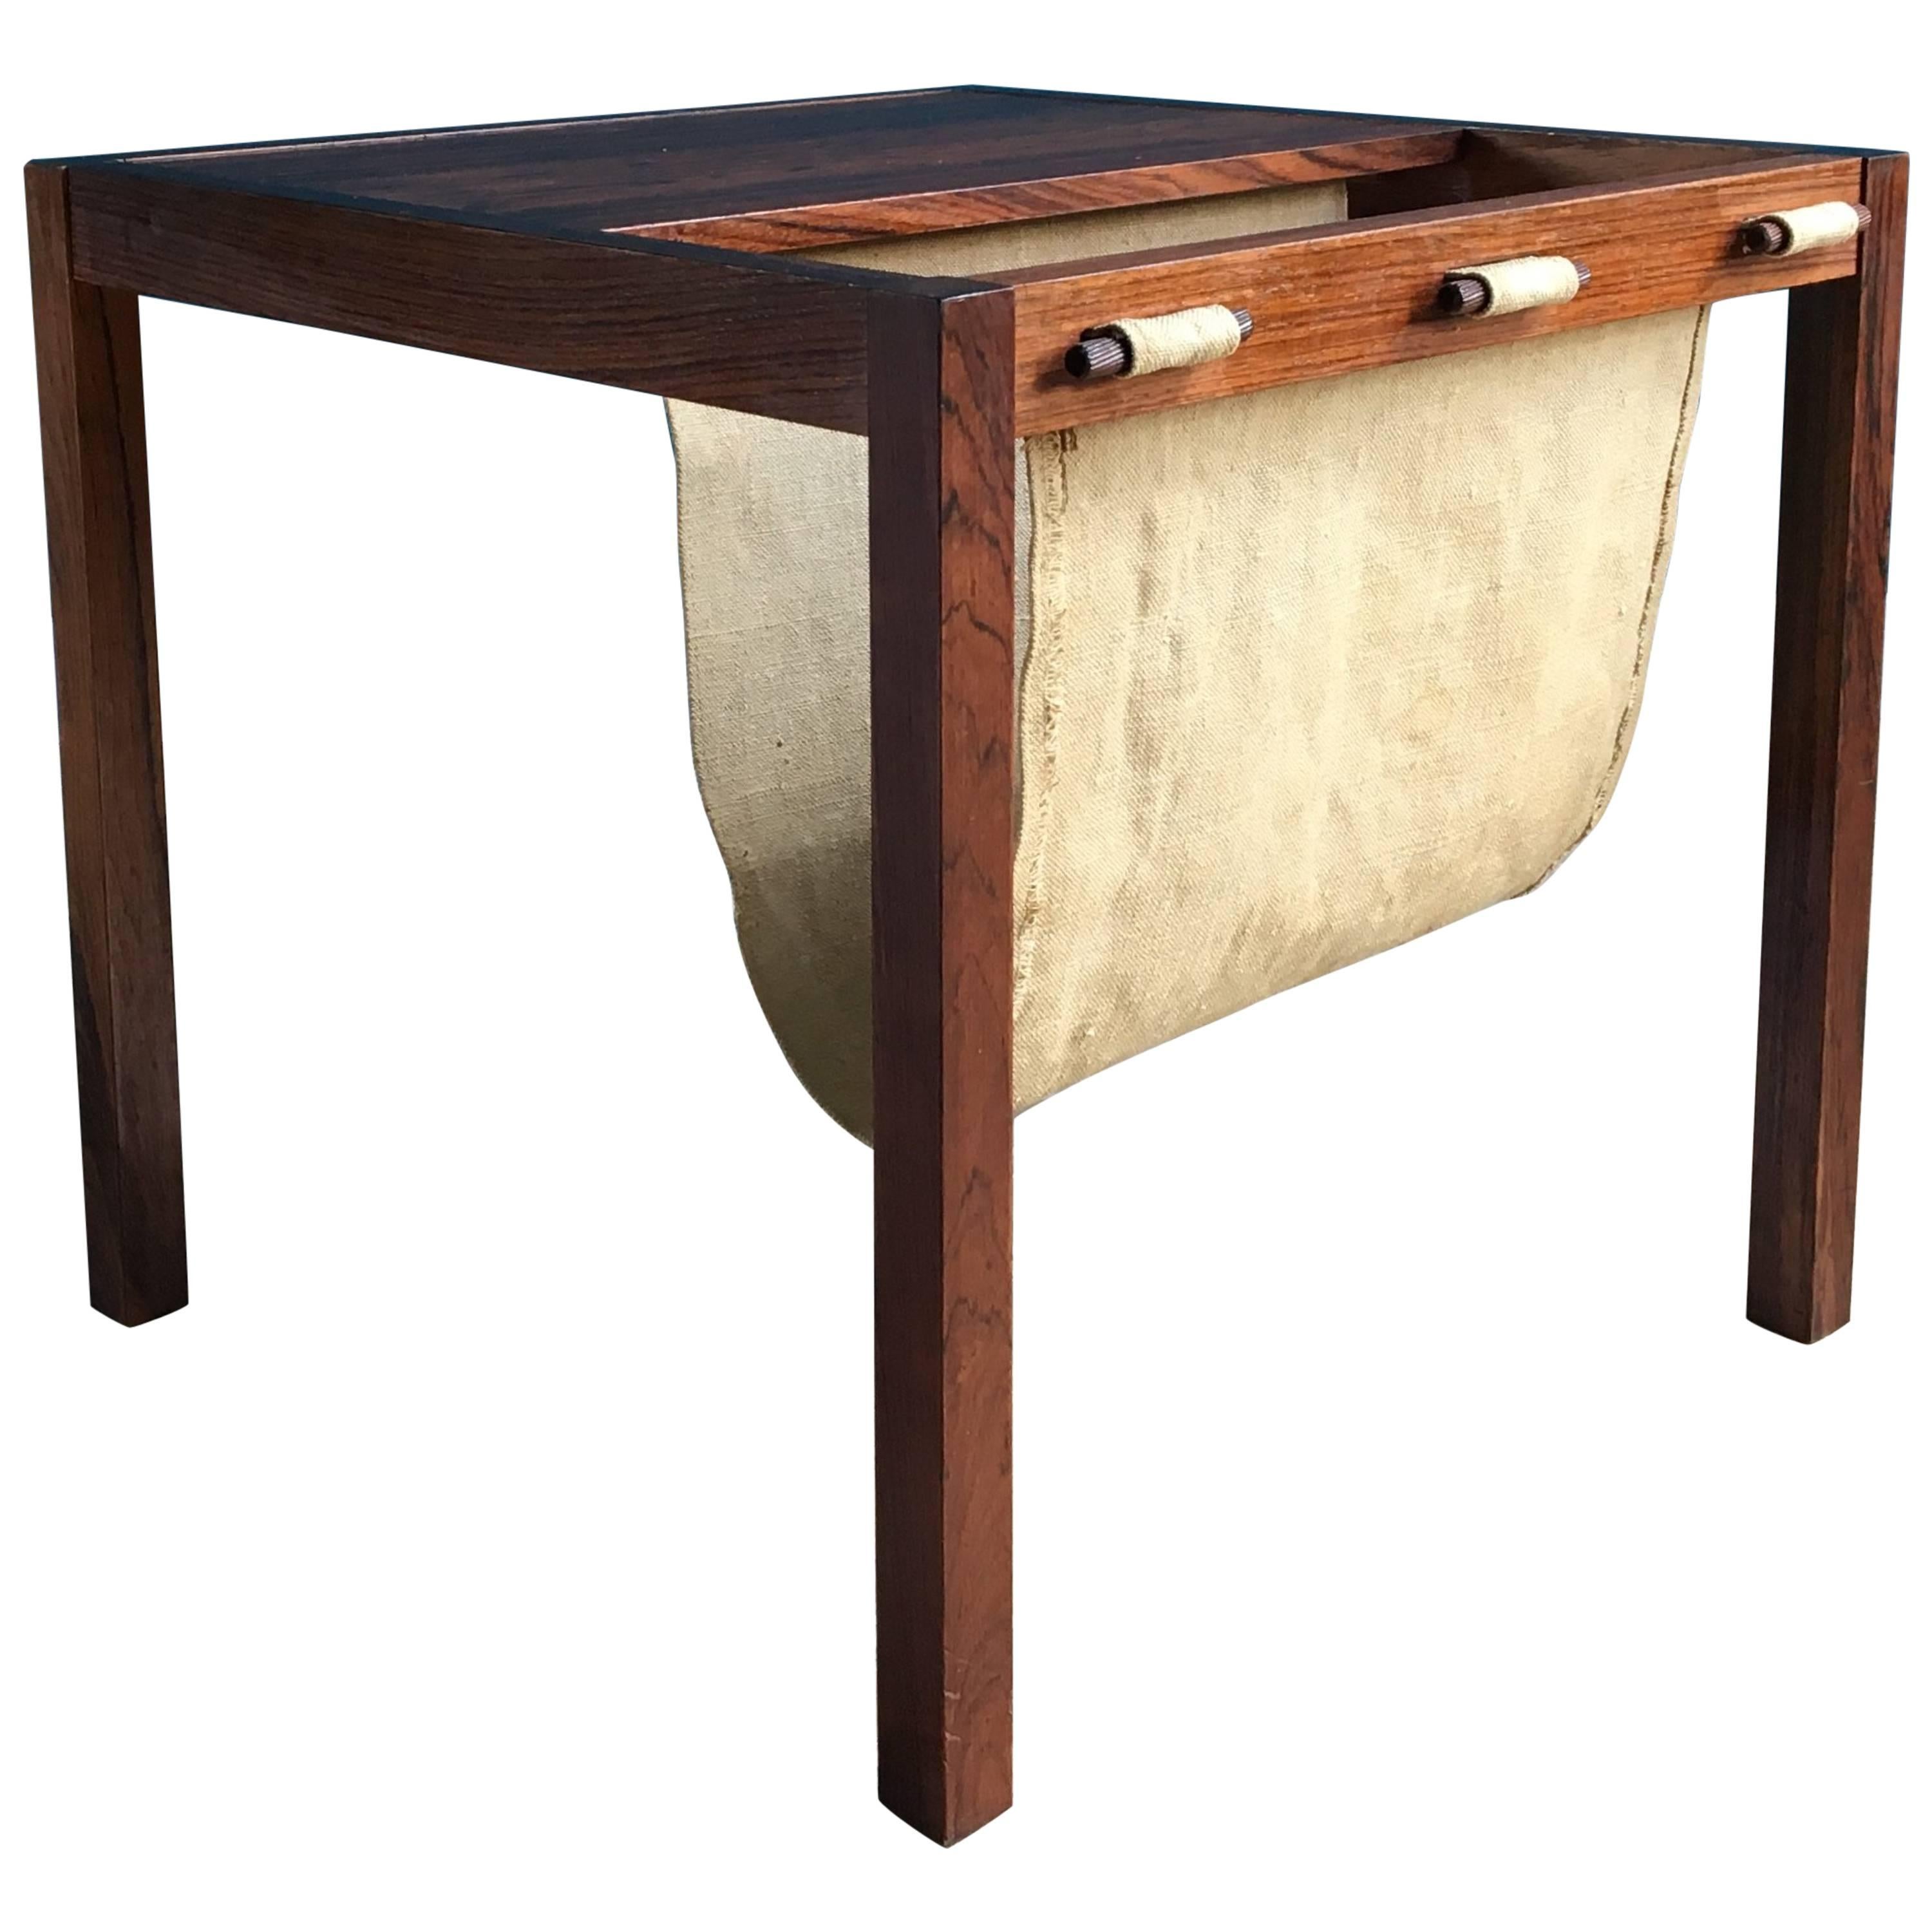 Vintage Rosewood Side Table with Magazine Rack, Denmark, 1960s